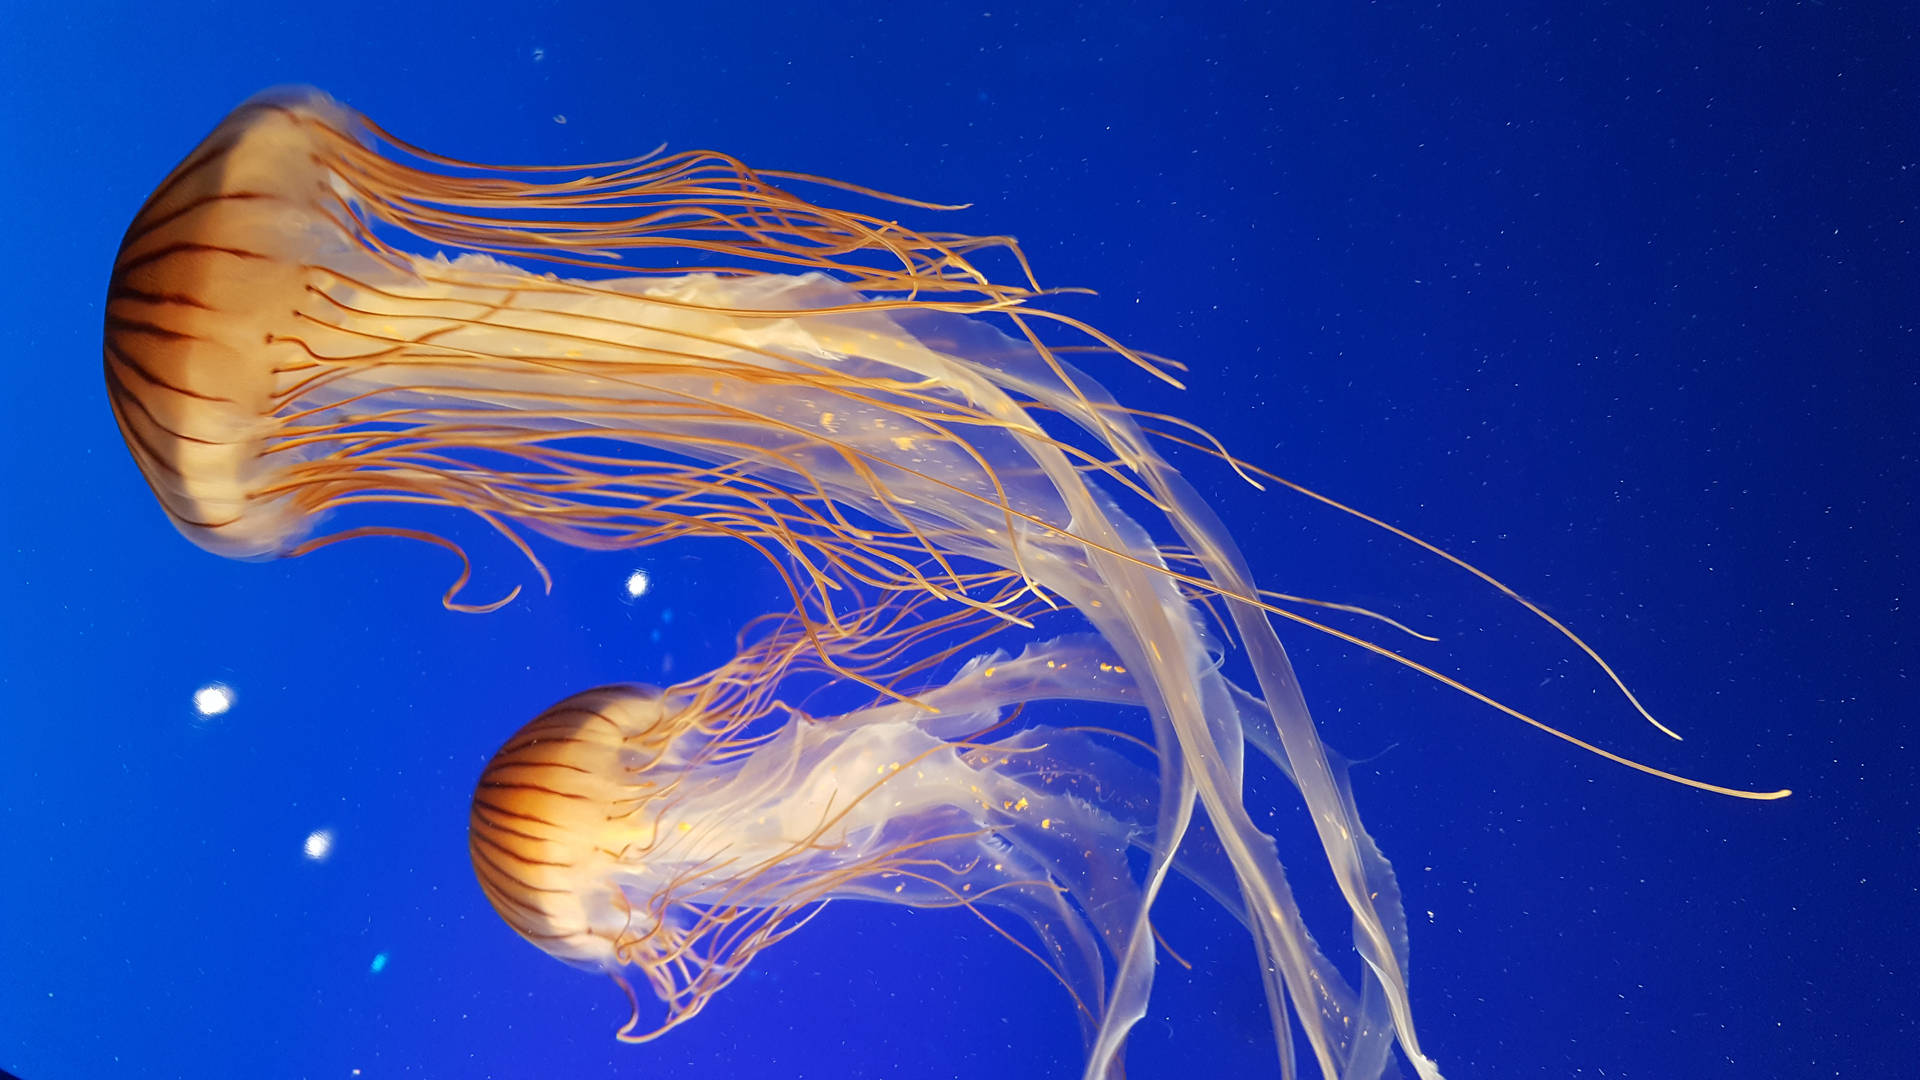 5312X2988 Jellyfish Wallpaper and Background